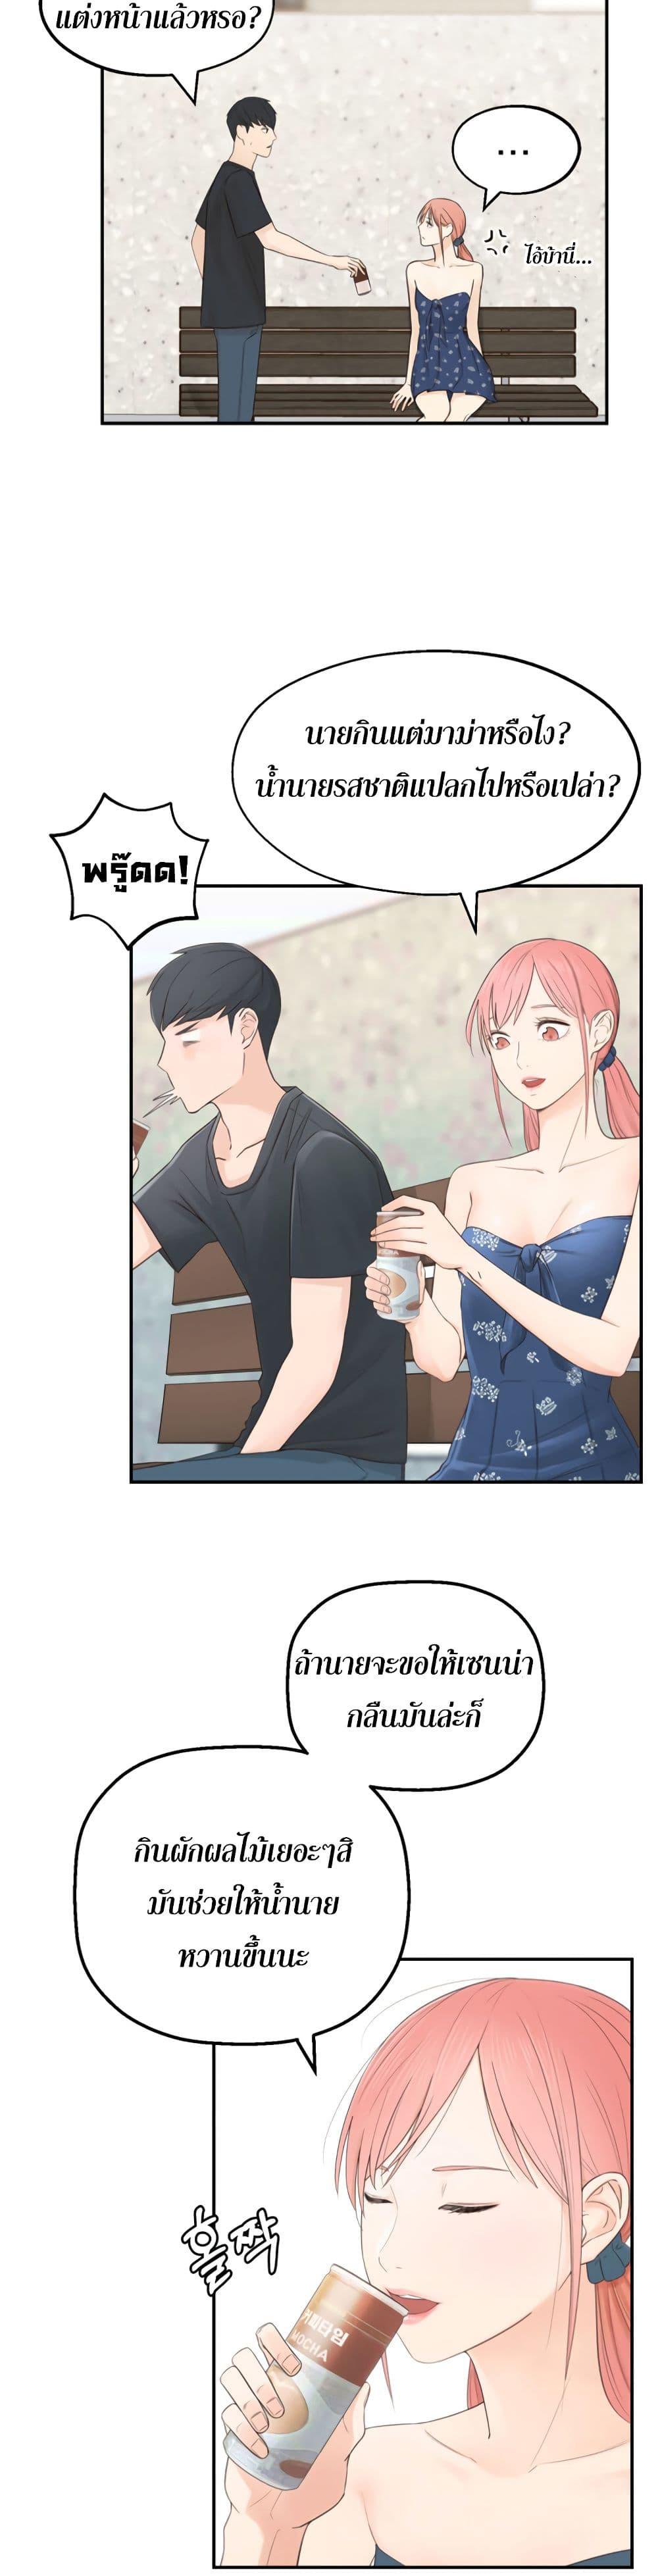 A Knowing Sister 1 ภาพ 22